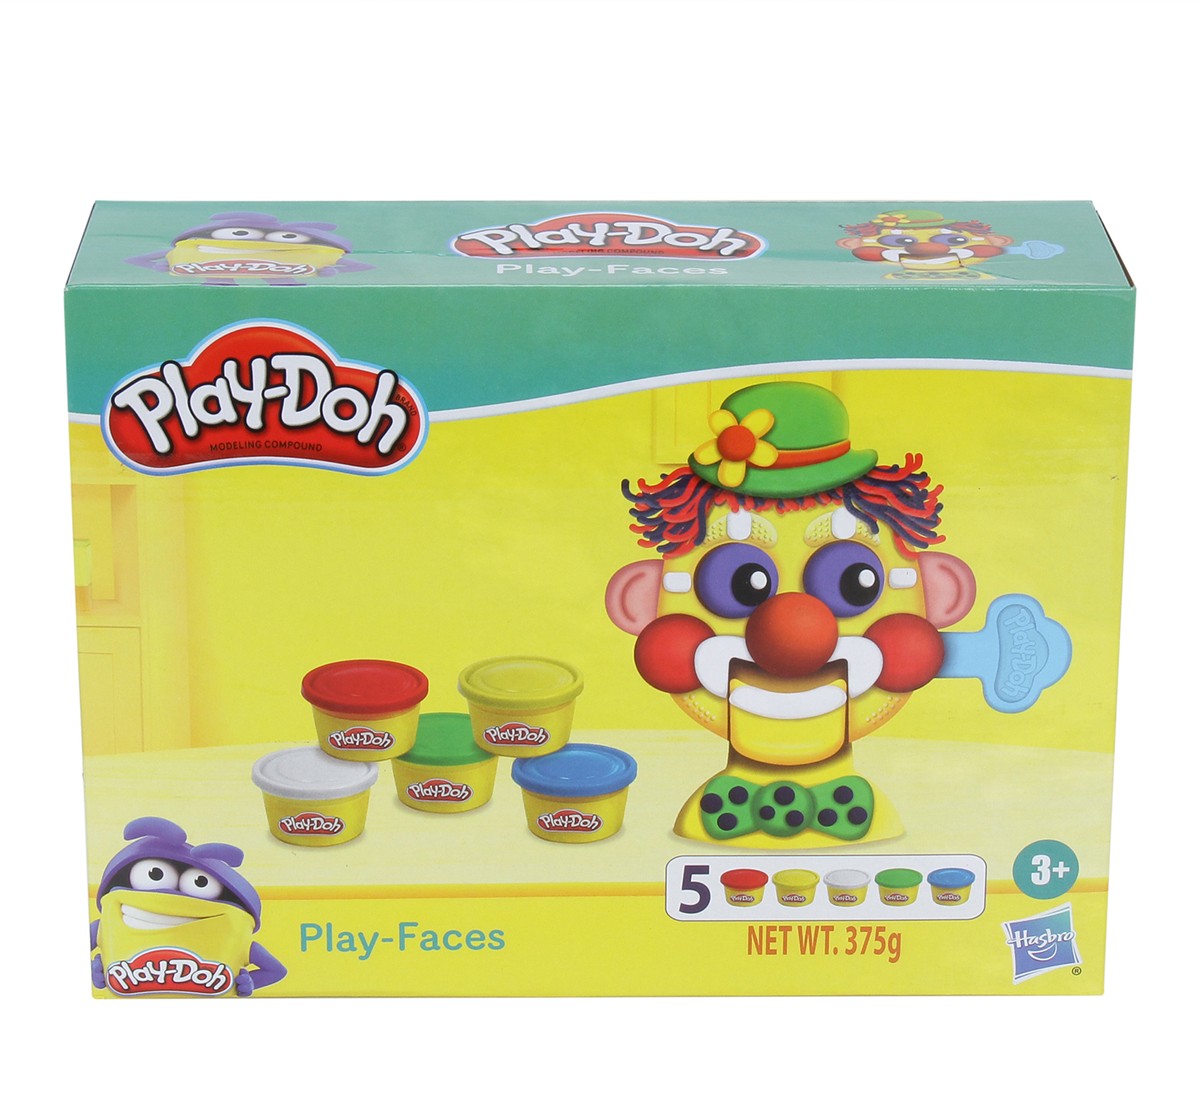 Play Doh Play Faces Activity Toy for Kids 3Y+, Multicolour